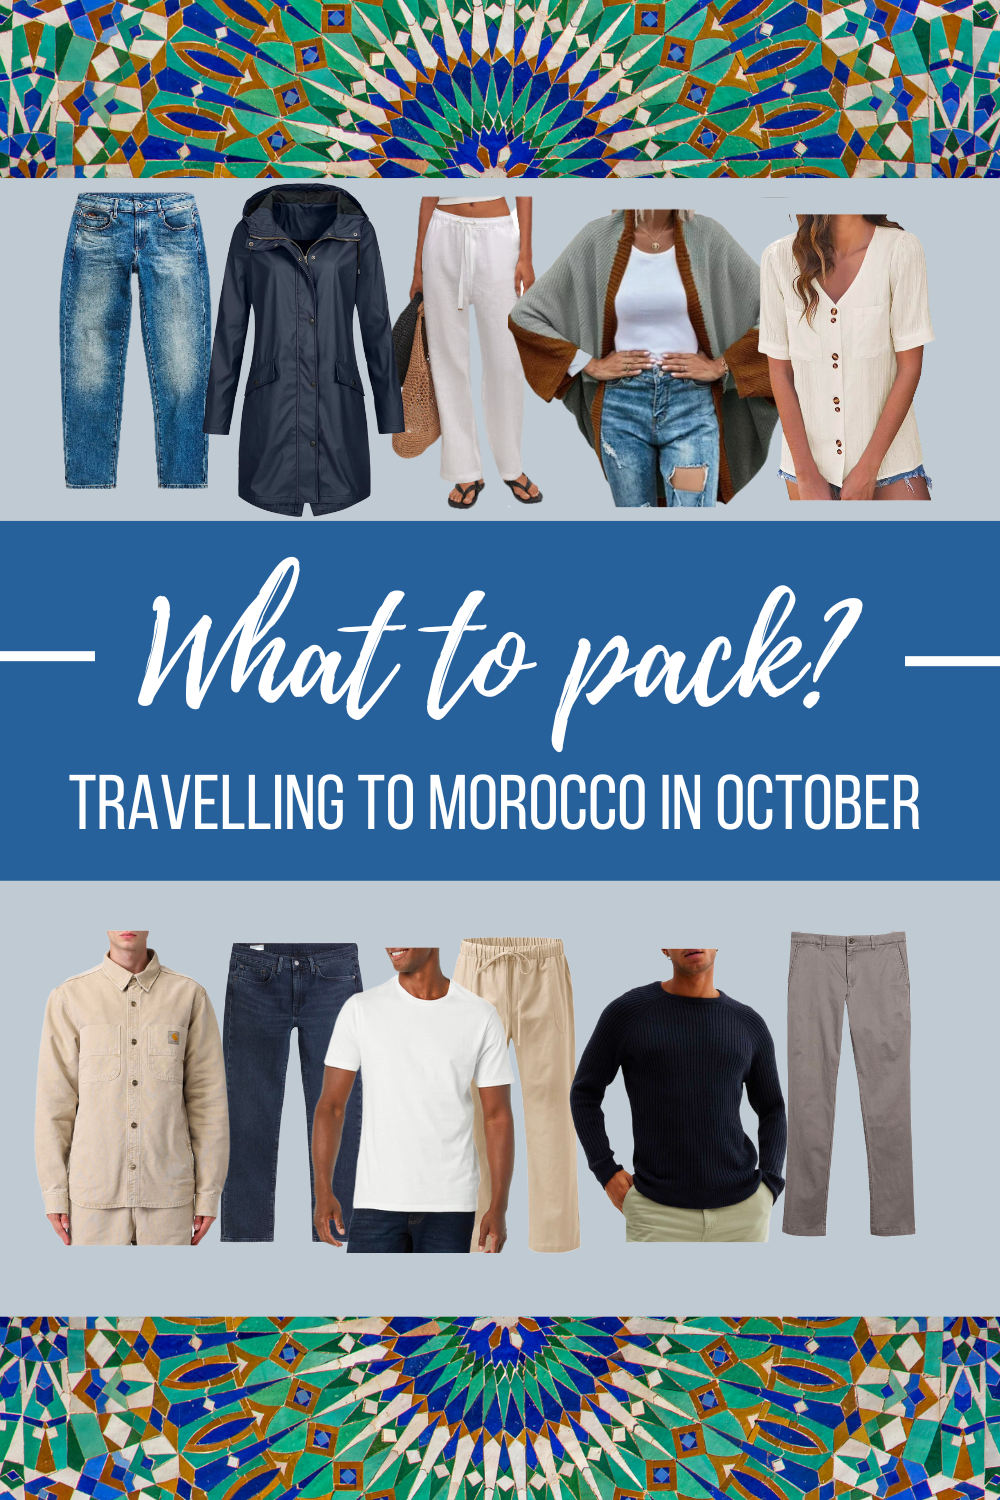 Long image with a variety of clothing options to pack when visiting Morocco in October